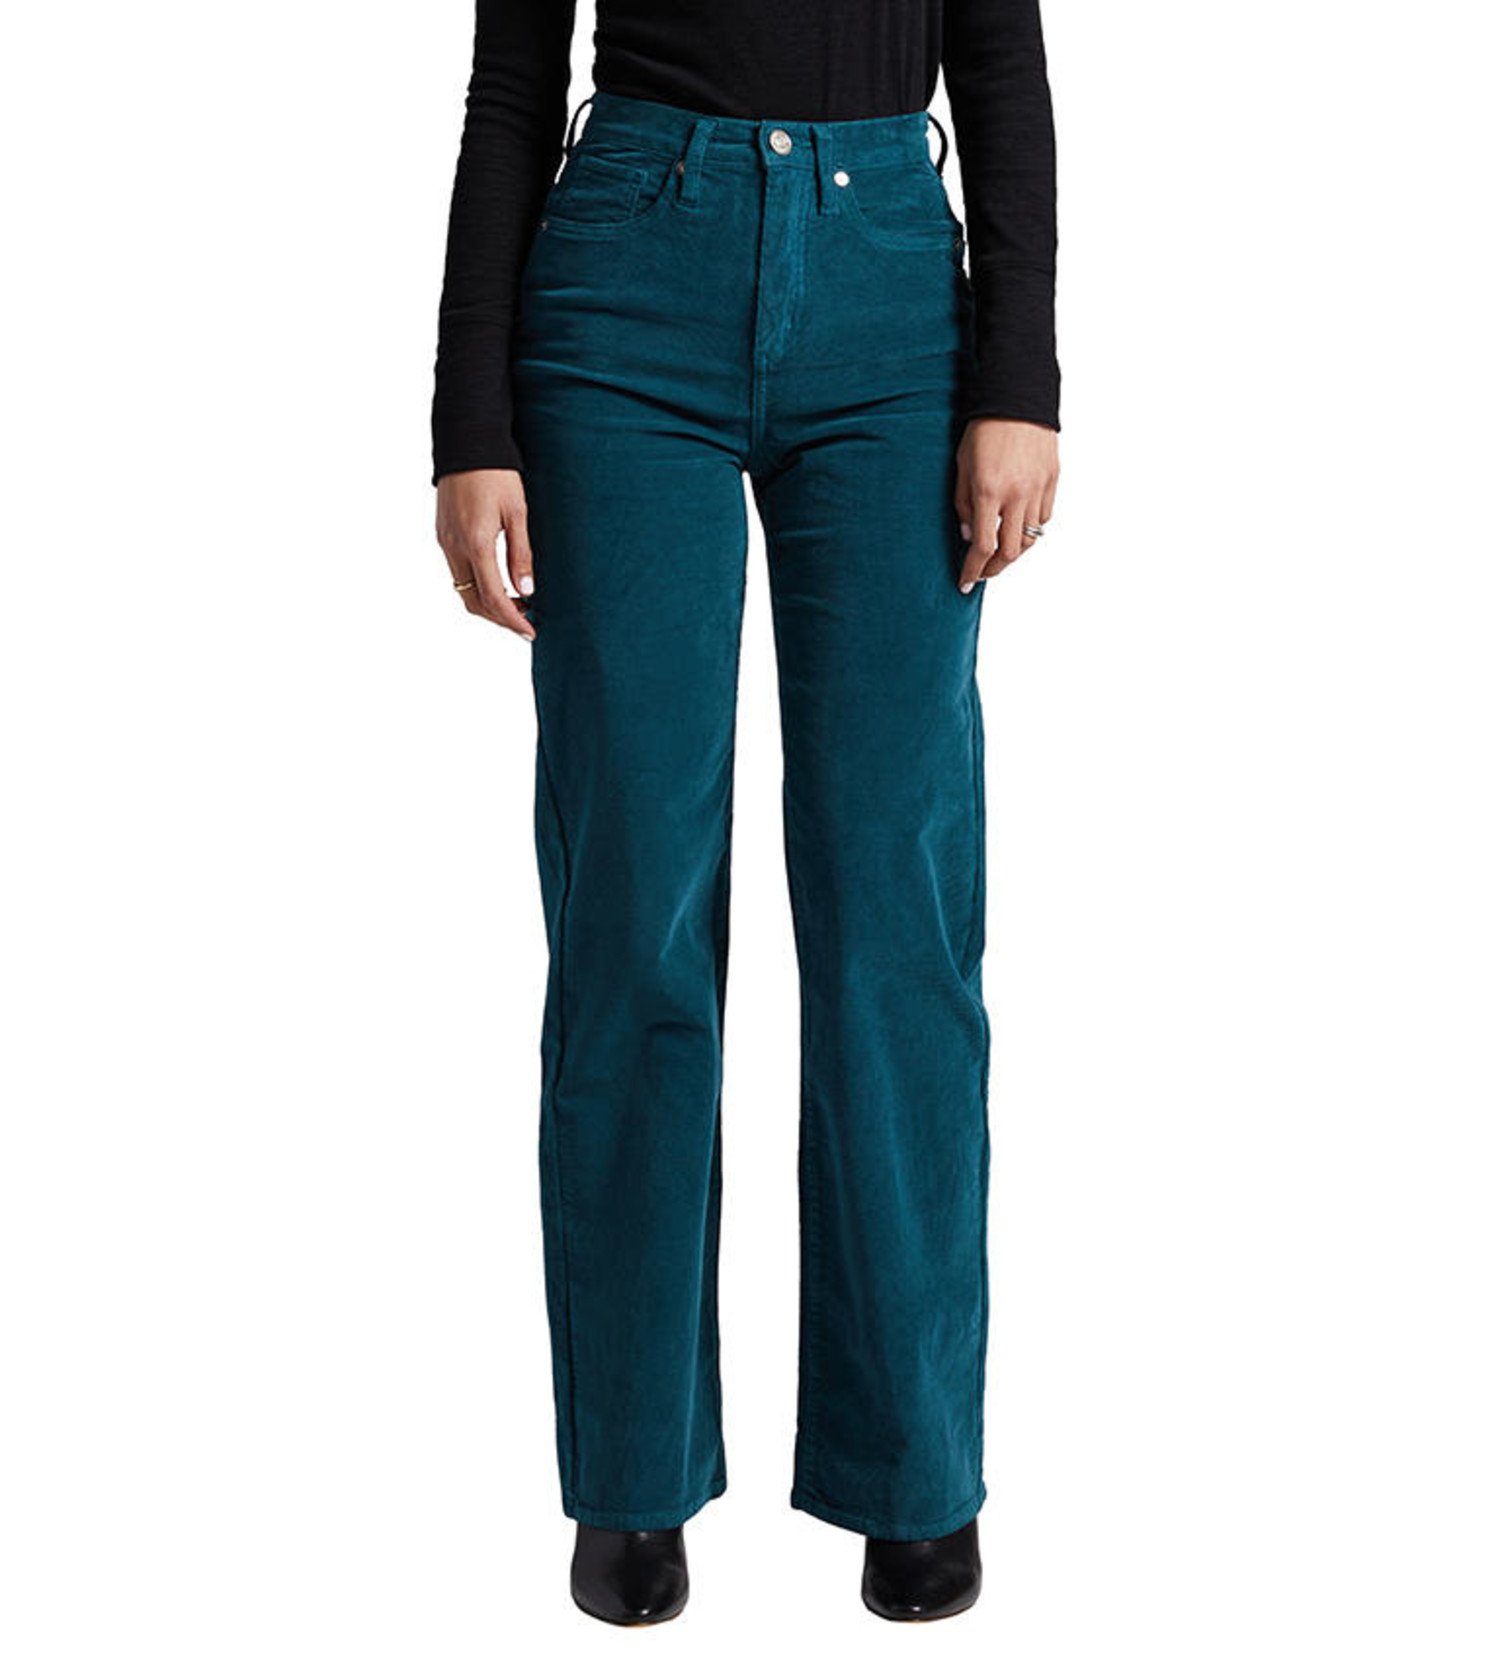 TORY BURCH Devi Corduroy Pants size 26, A Runway Collection and A Tory  Favorite